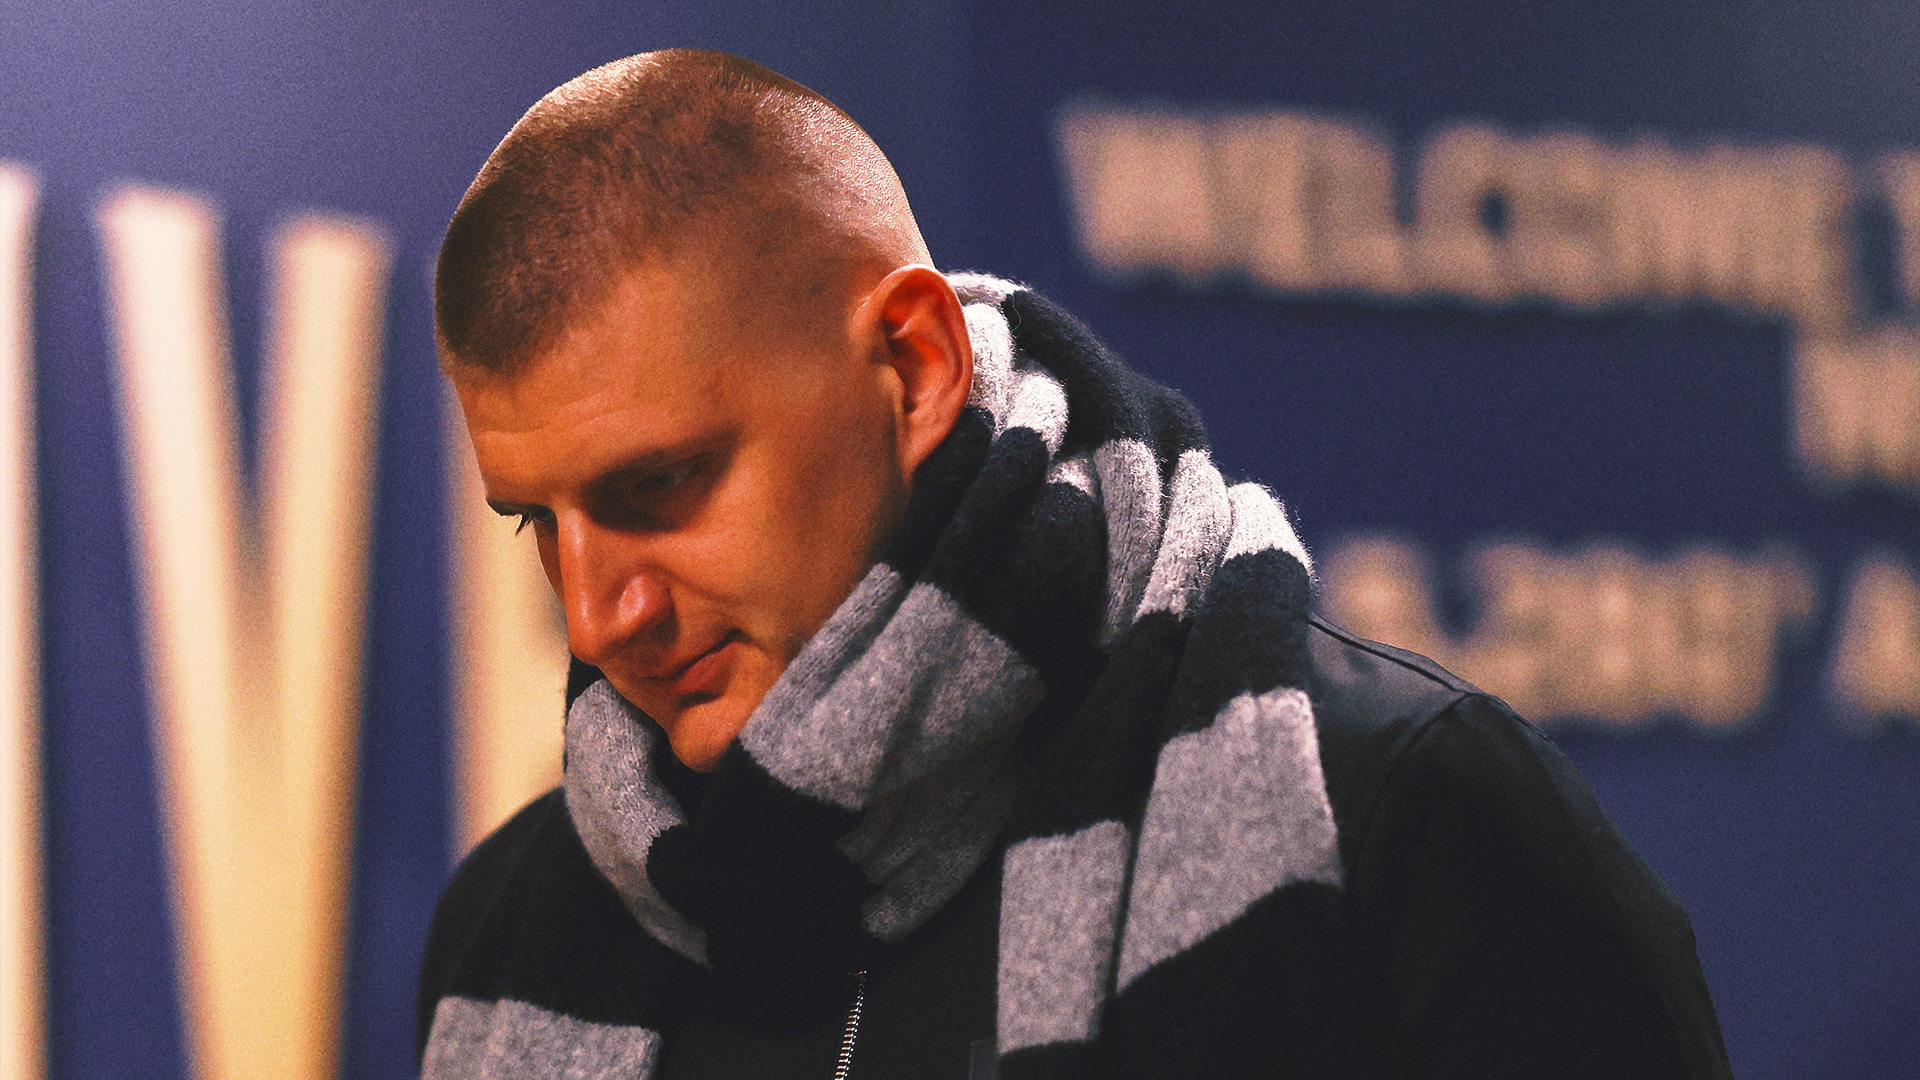 Nikola Jokic shows up to game dressed like "Gru" from "Despicable Me"